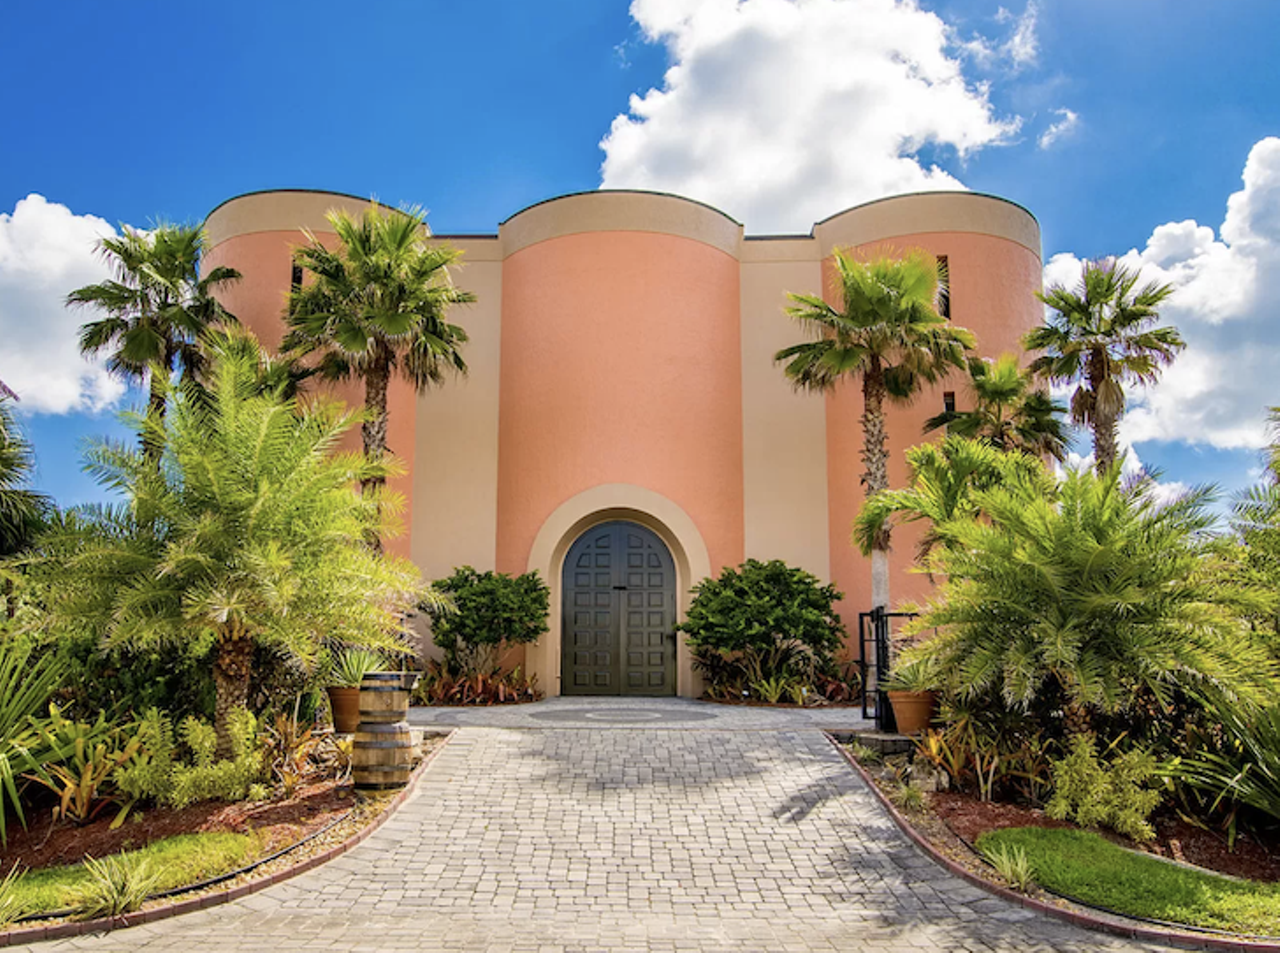 The big peach 'castle' in Florida is now on the market